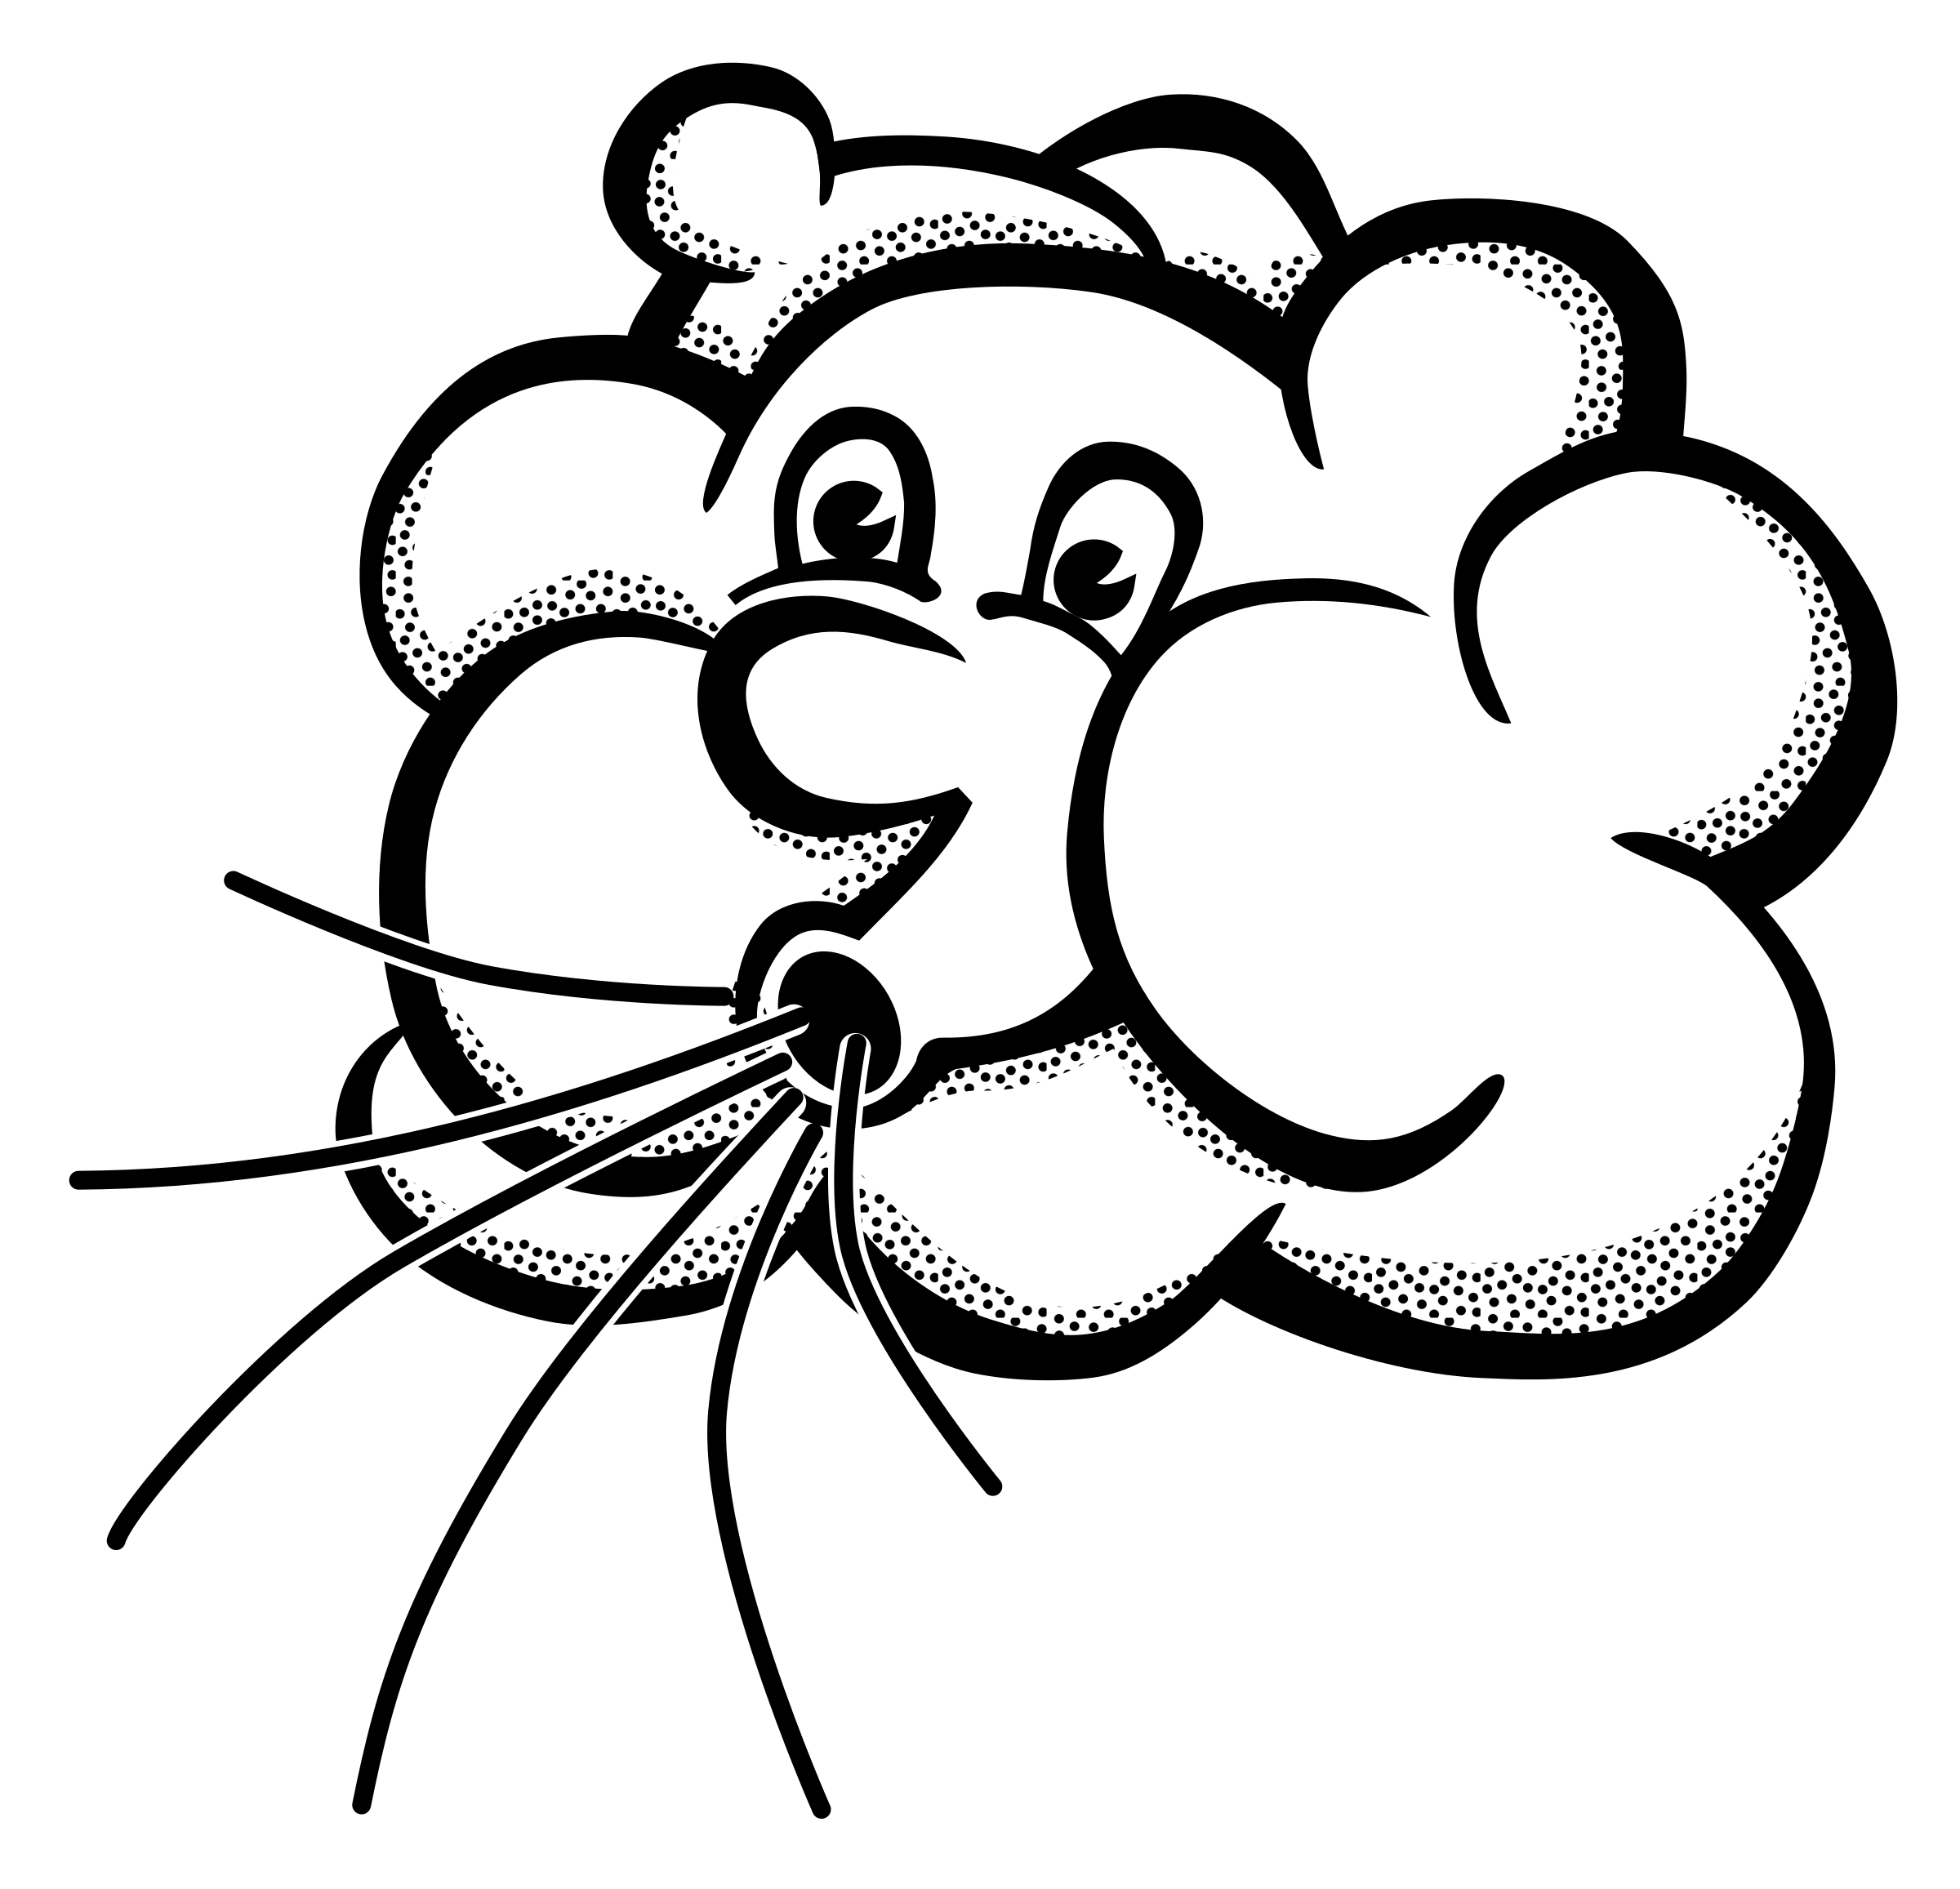 free black and white weather clipart - photo #49